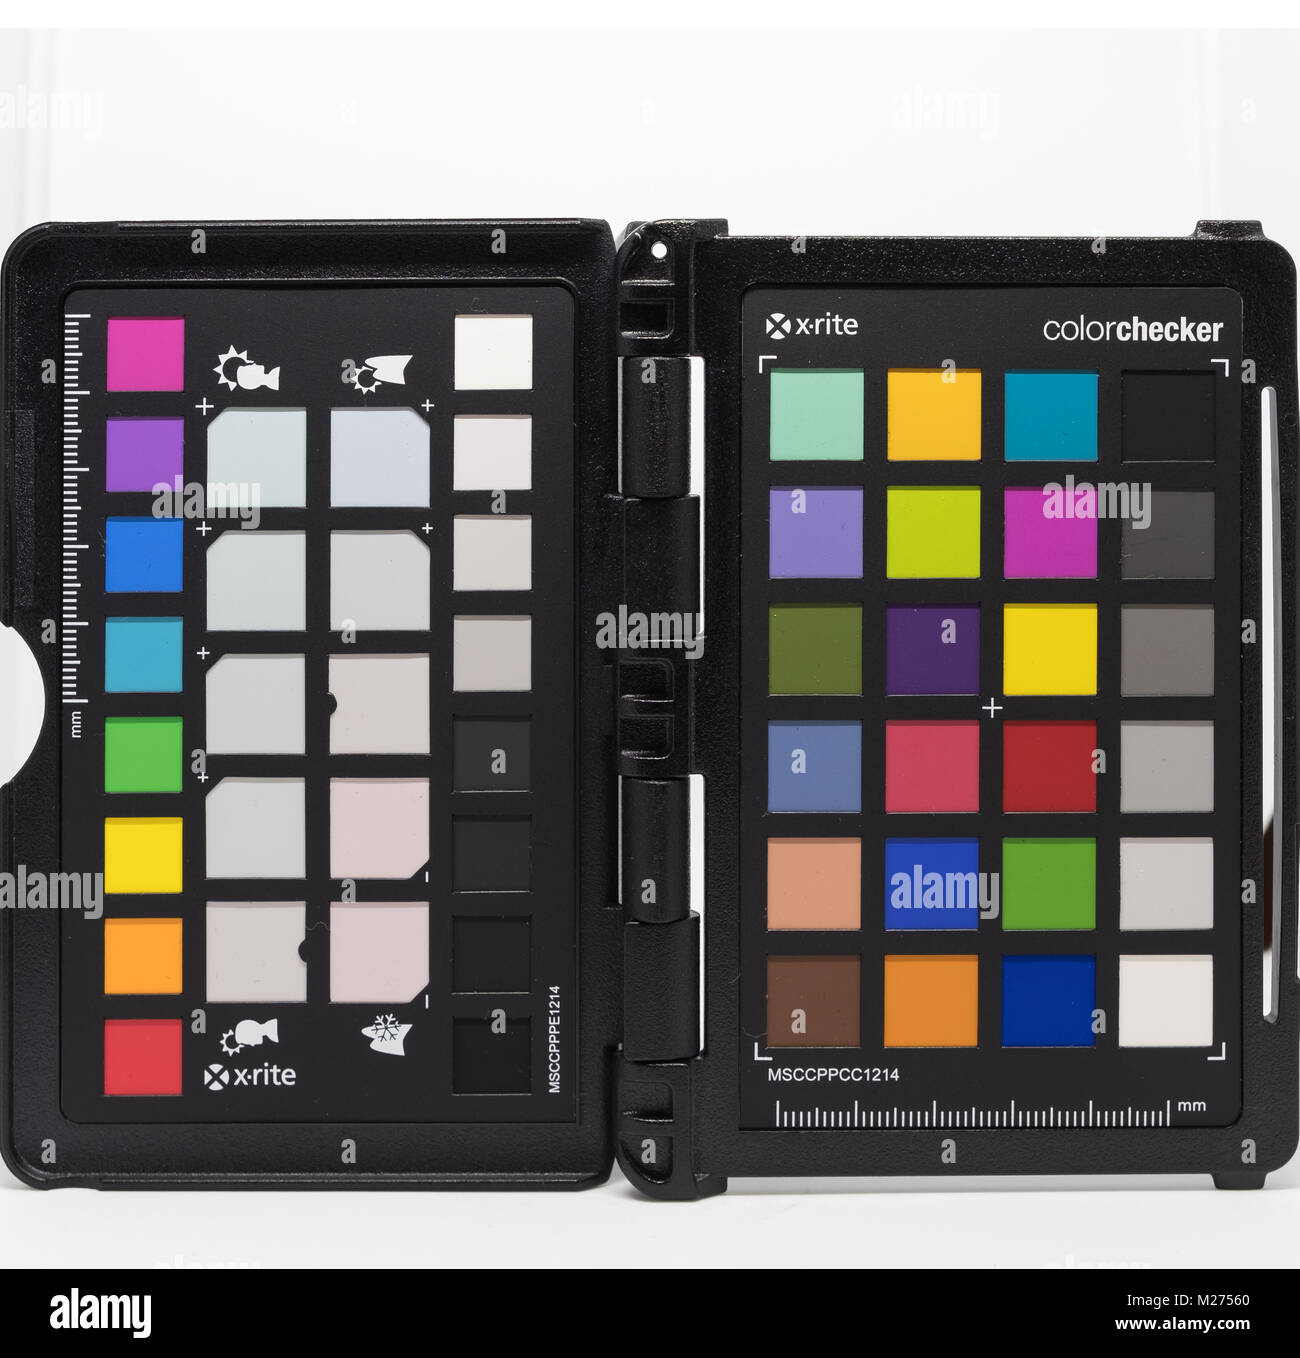 Largs, Scotland, UK - February 04, 2018: Close up view of Color Checker Passport equipment by X-rite used by professional photographers to adjust and  Stock Photo